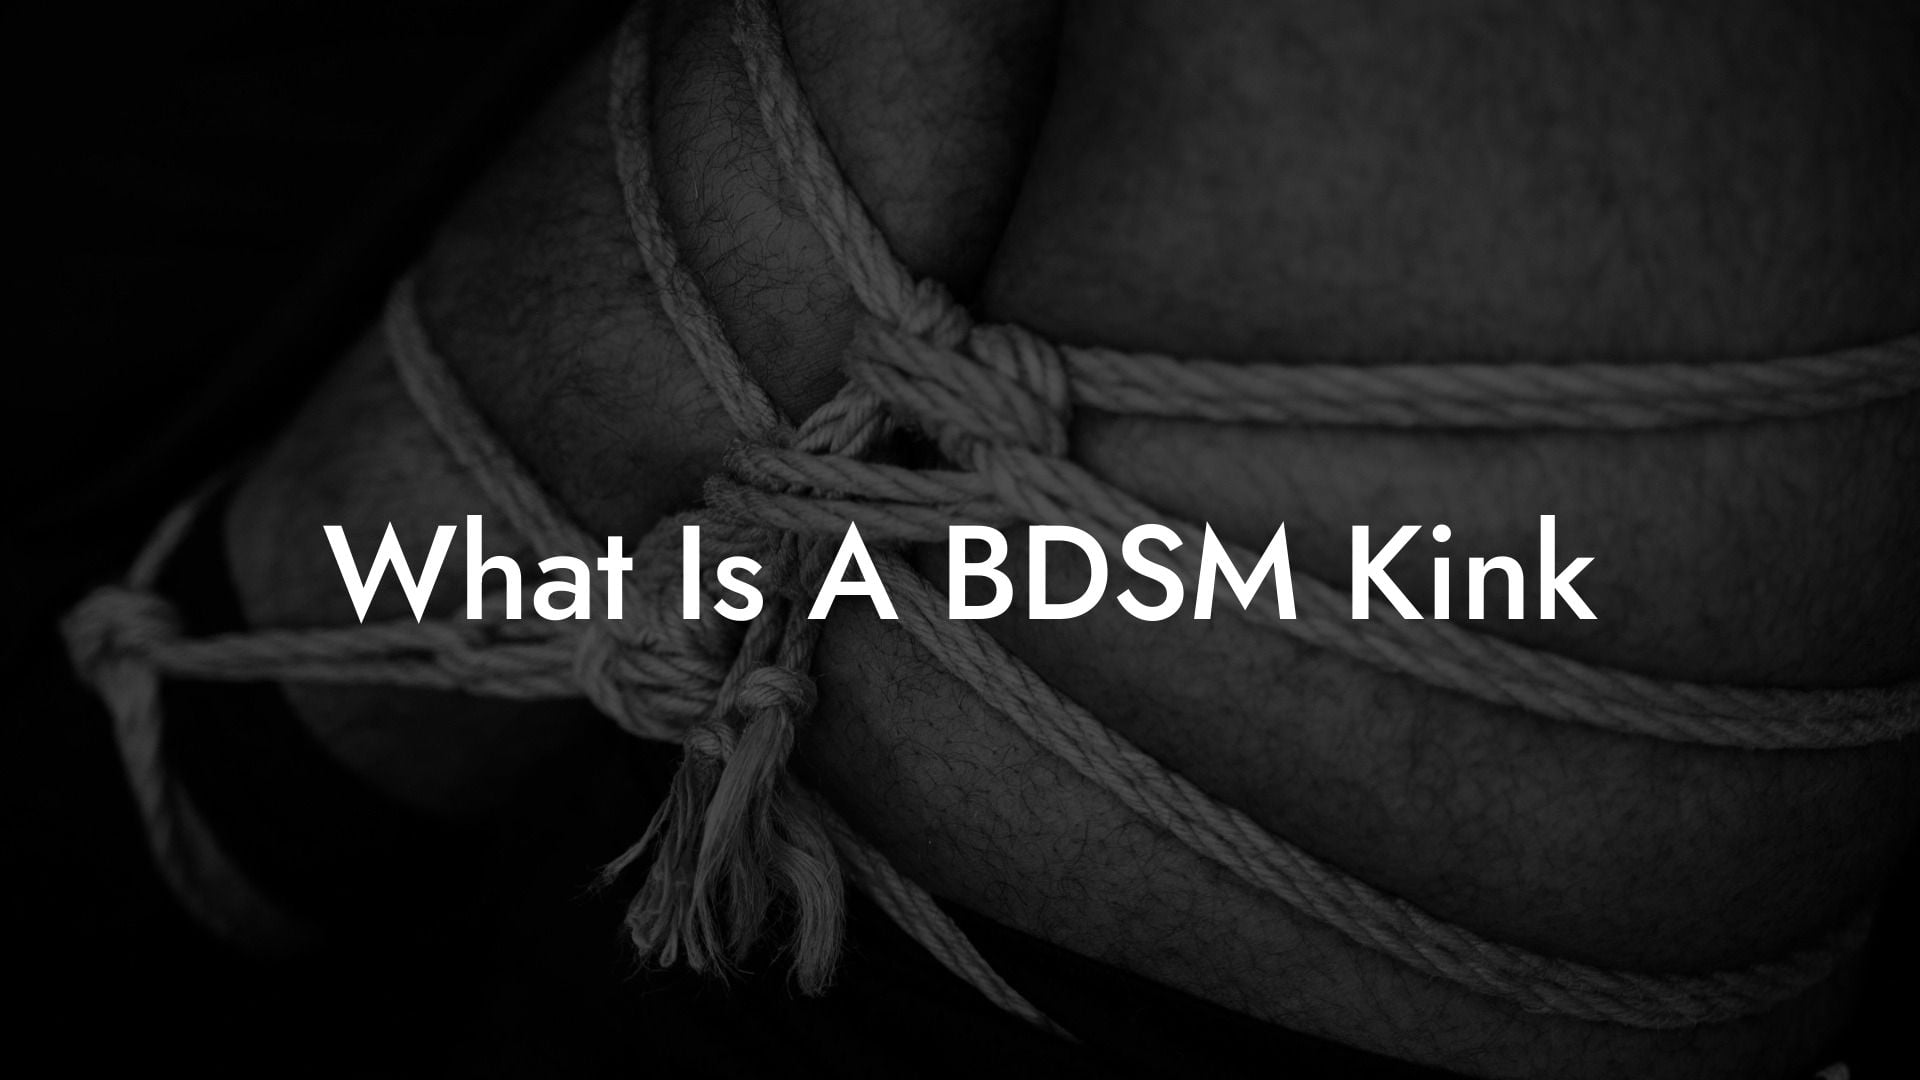 What Is A BDSM Kink